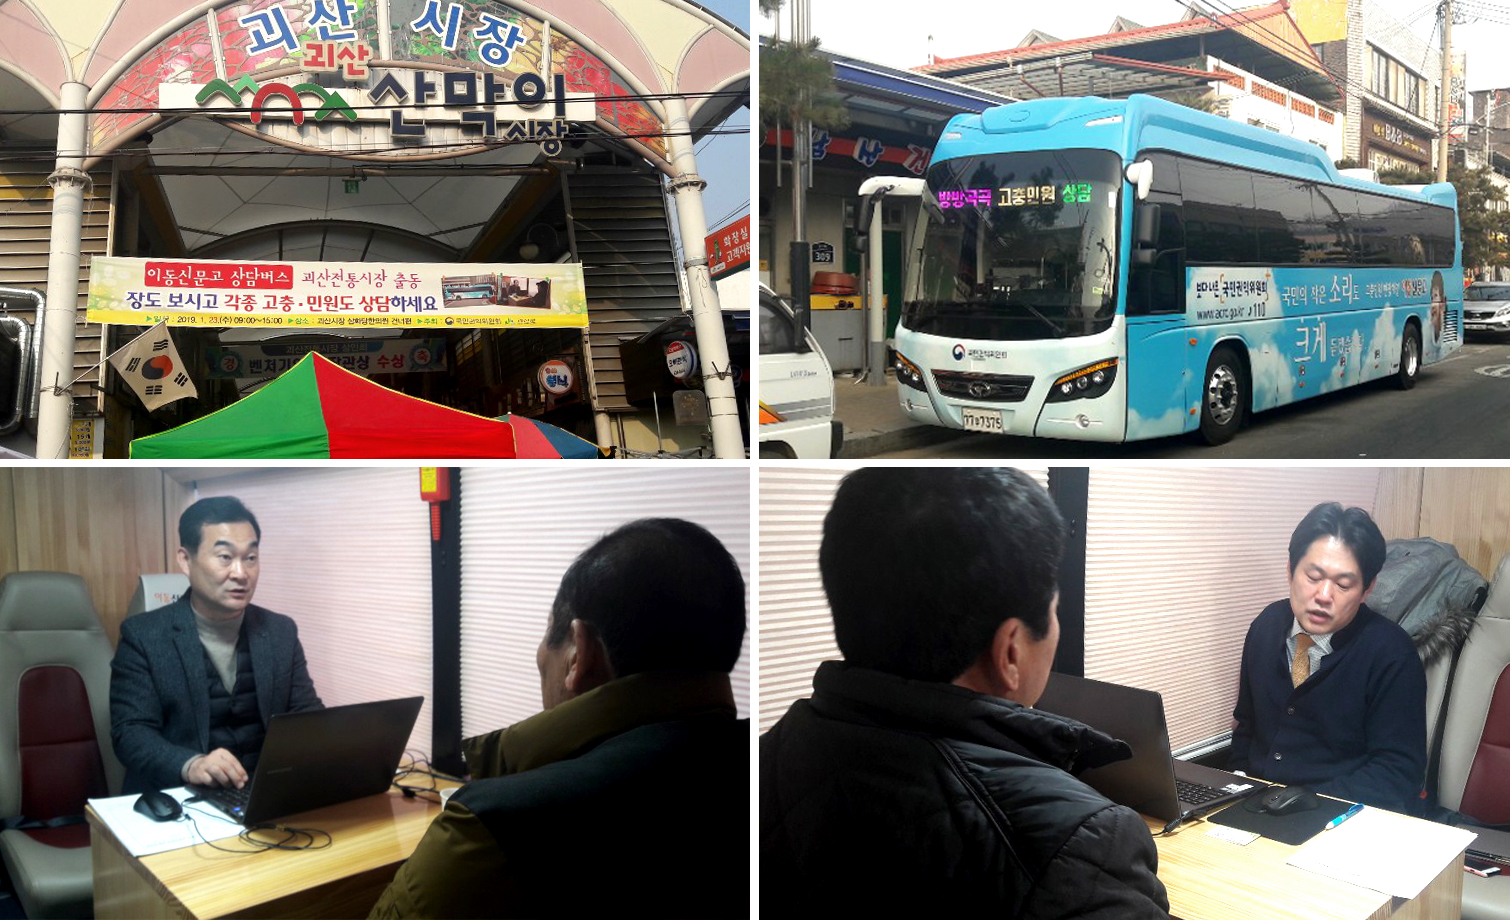 ACRC’s Complaint Outreach Bus traveled to a traditional market in Goesan-si, North Chungcheong Province